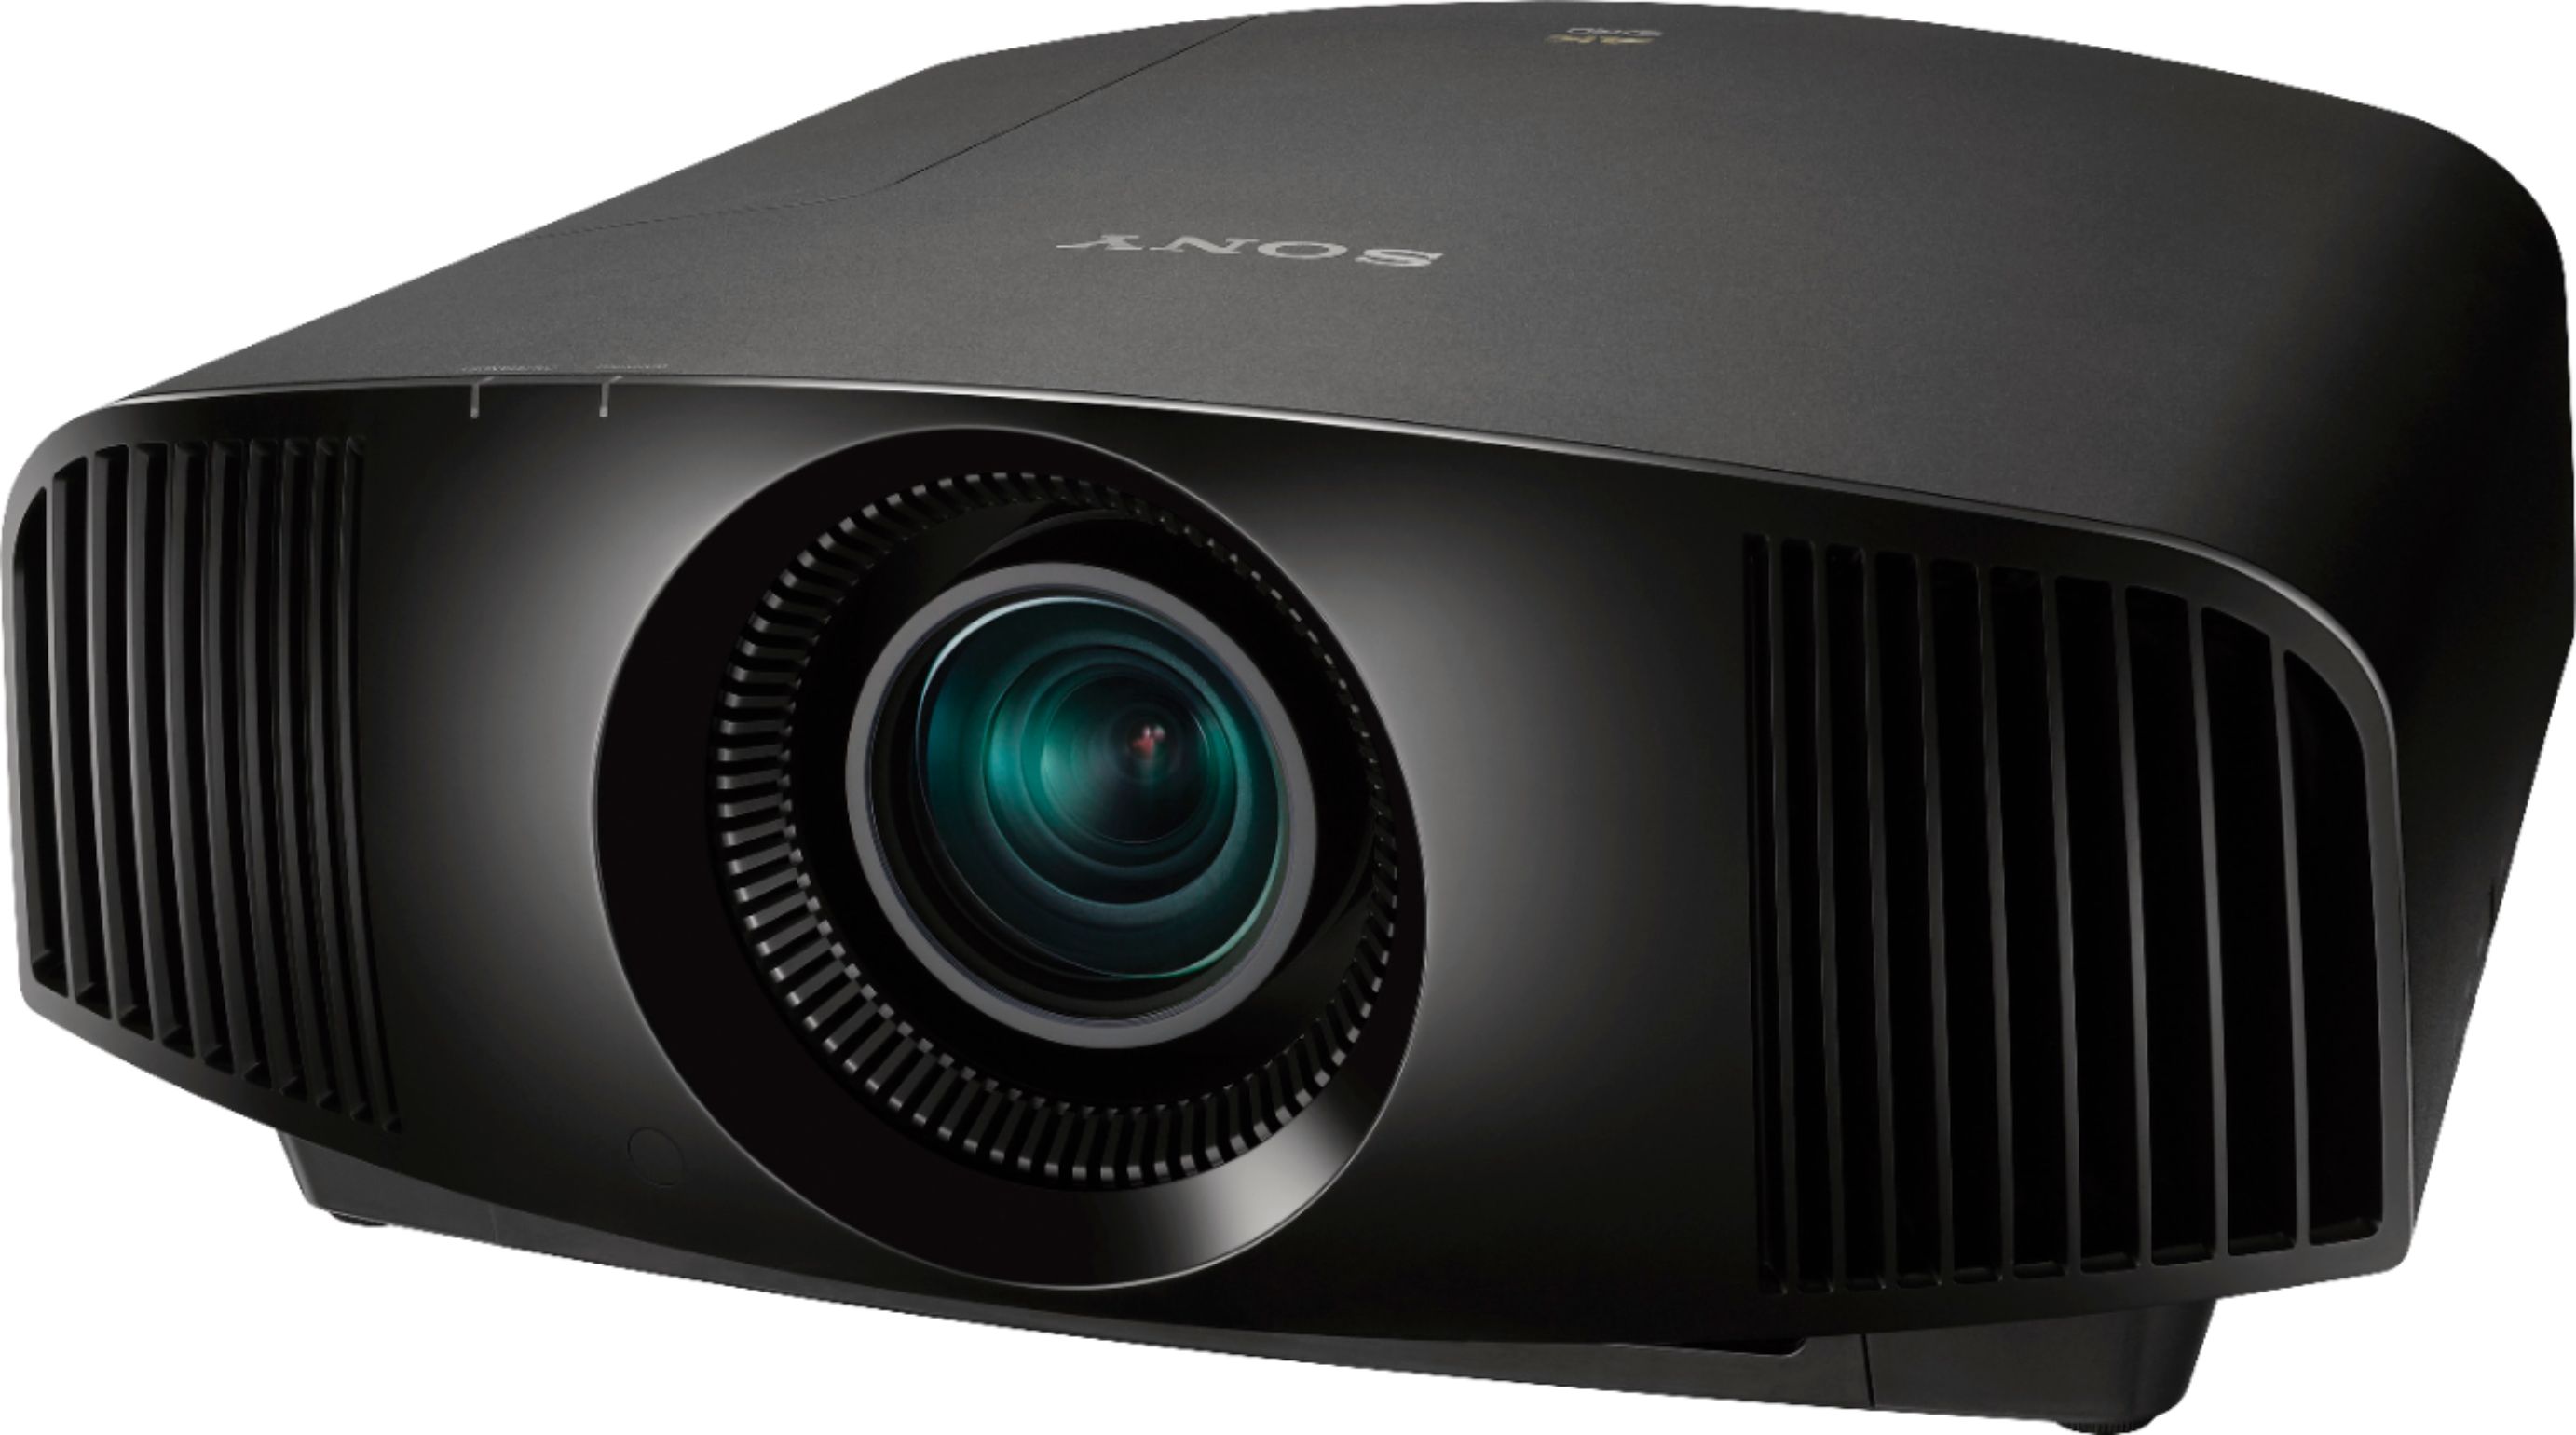 Angle View: Sony - Premium 4K HDR Home Theater Projector - Black